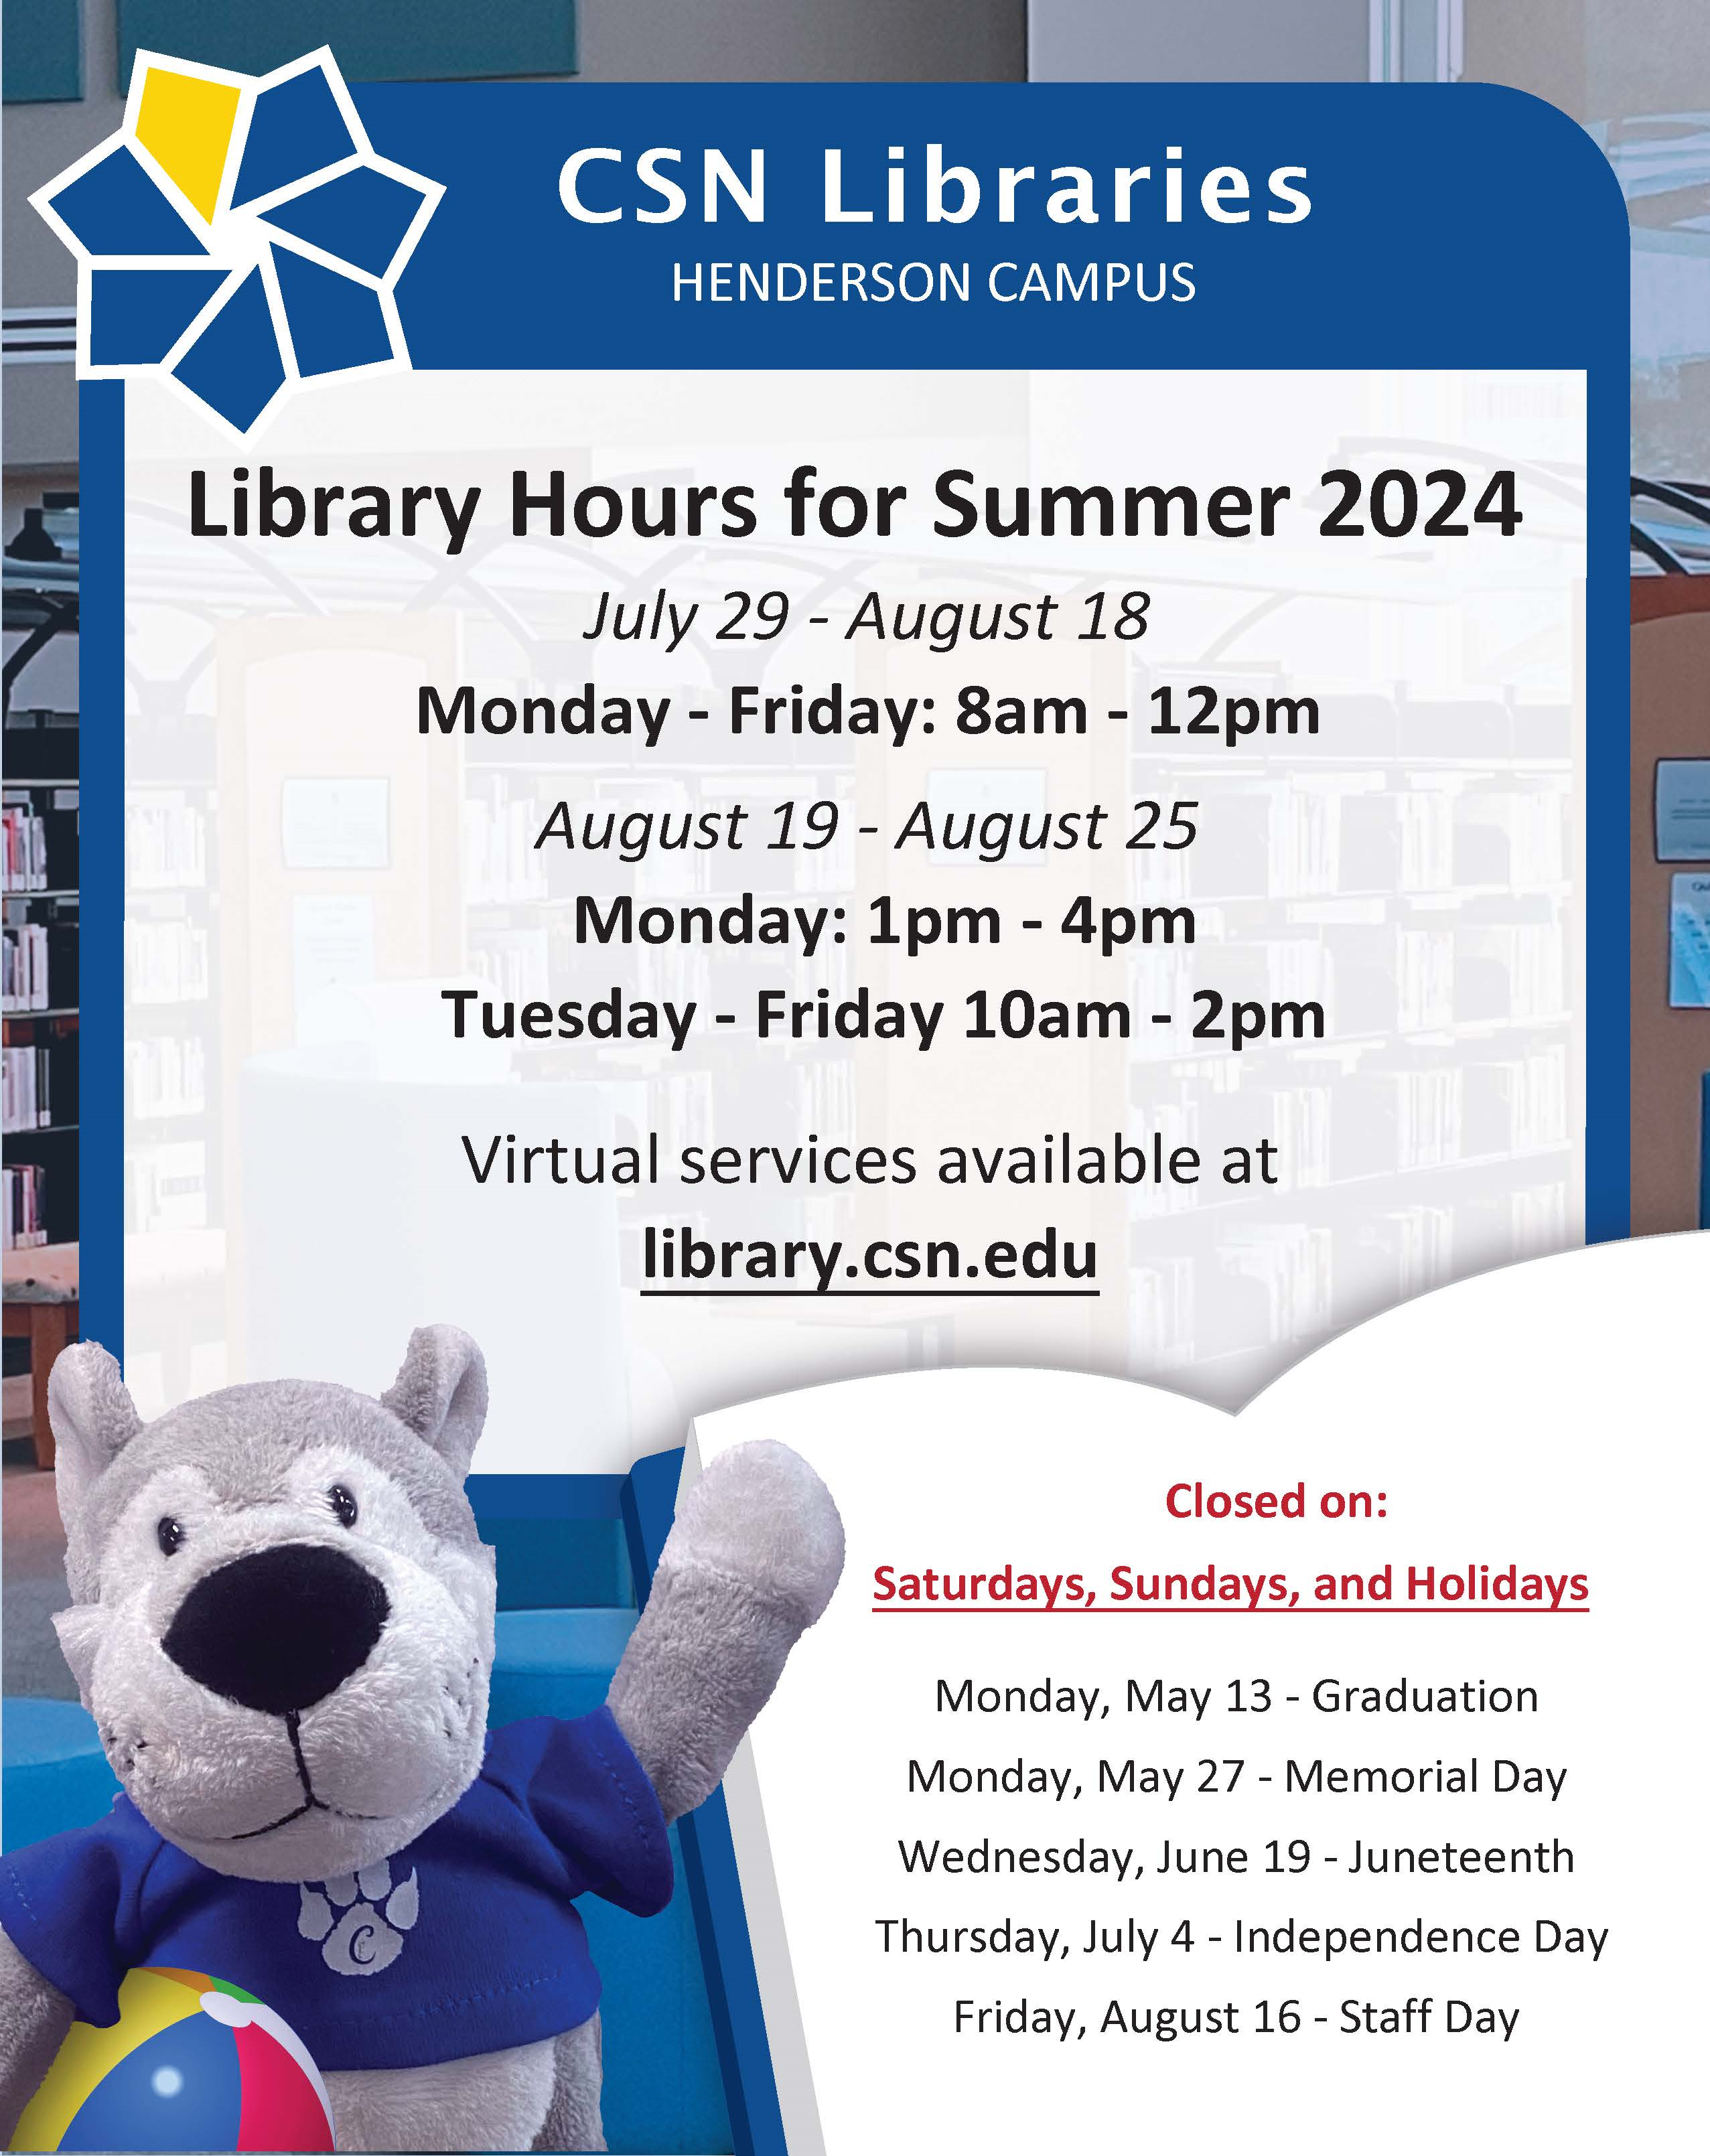 CSN Libraries Summer Hours - Henderson Campus - July 29-August 25